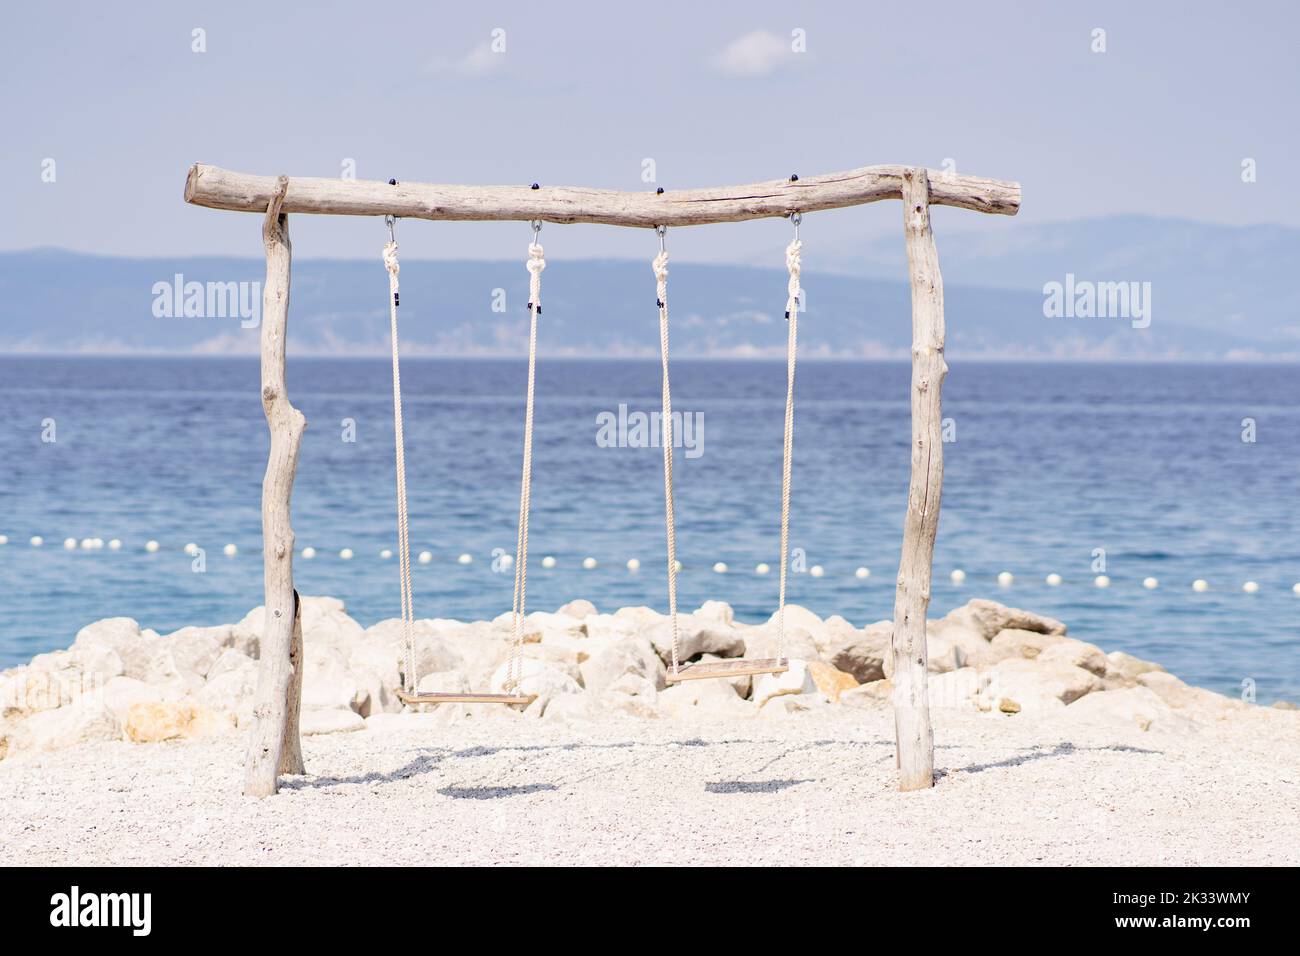 A pair of wooden swings tied with ropes at the beach against the background view of the sea. Stock Photo